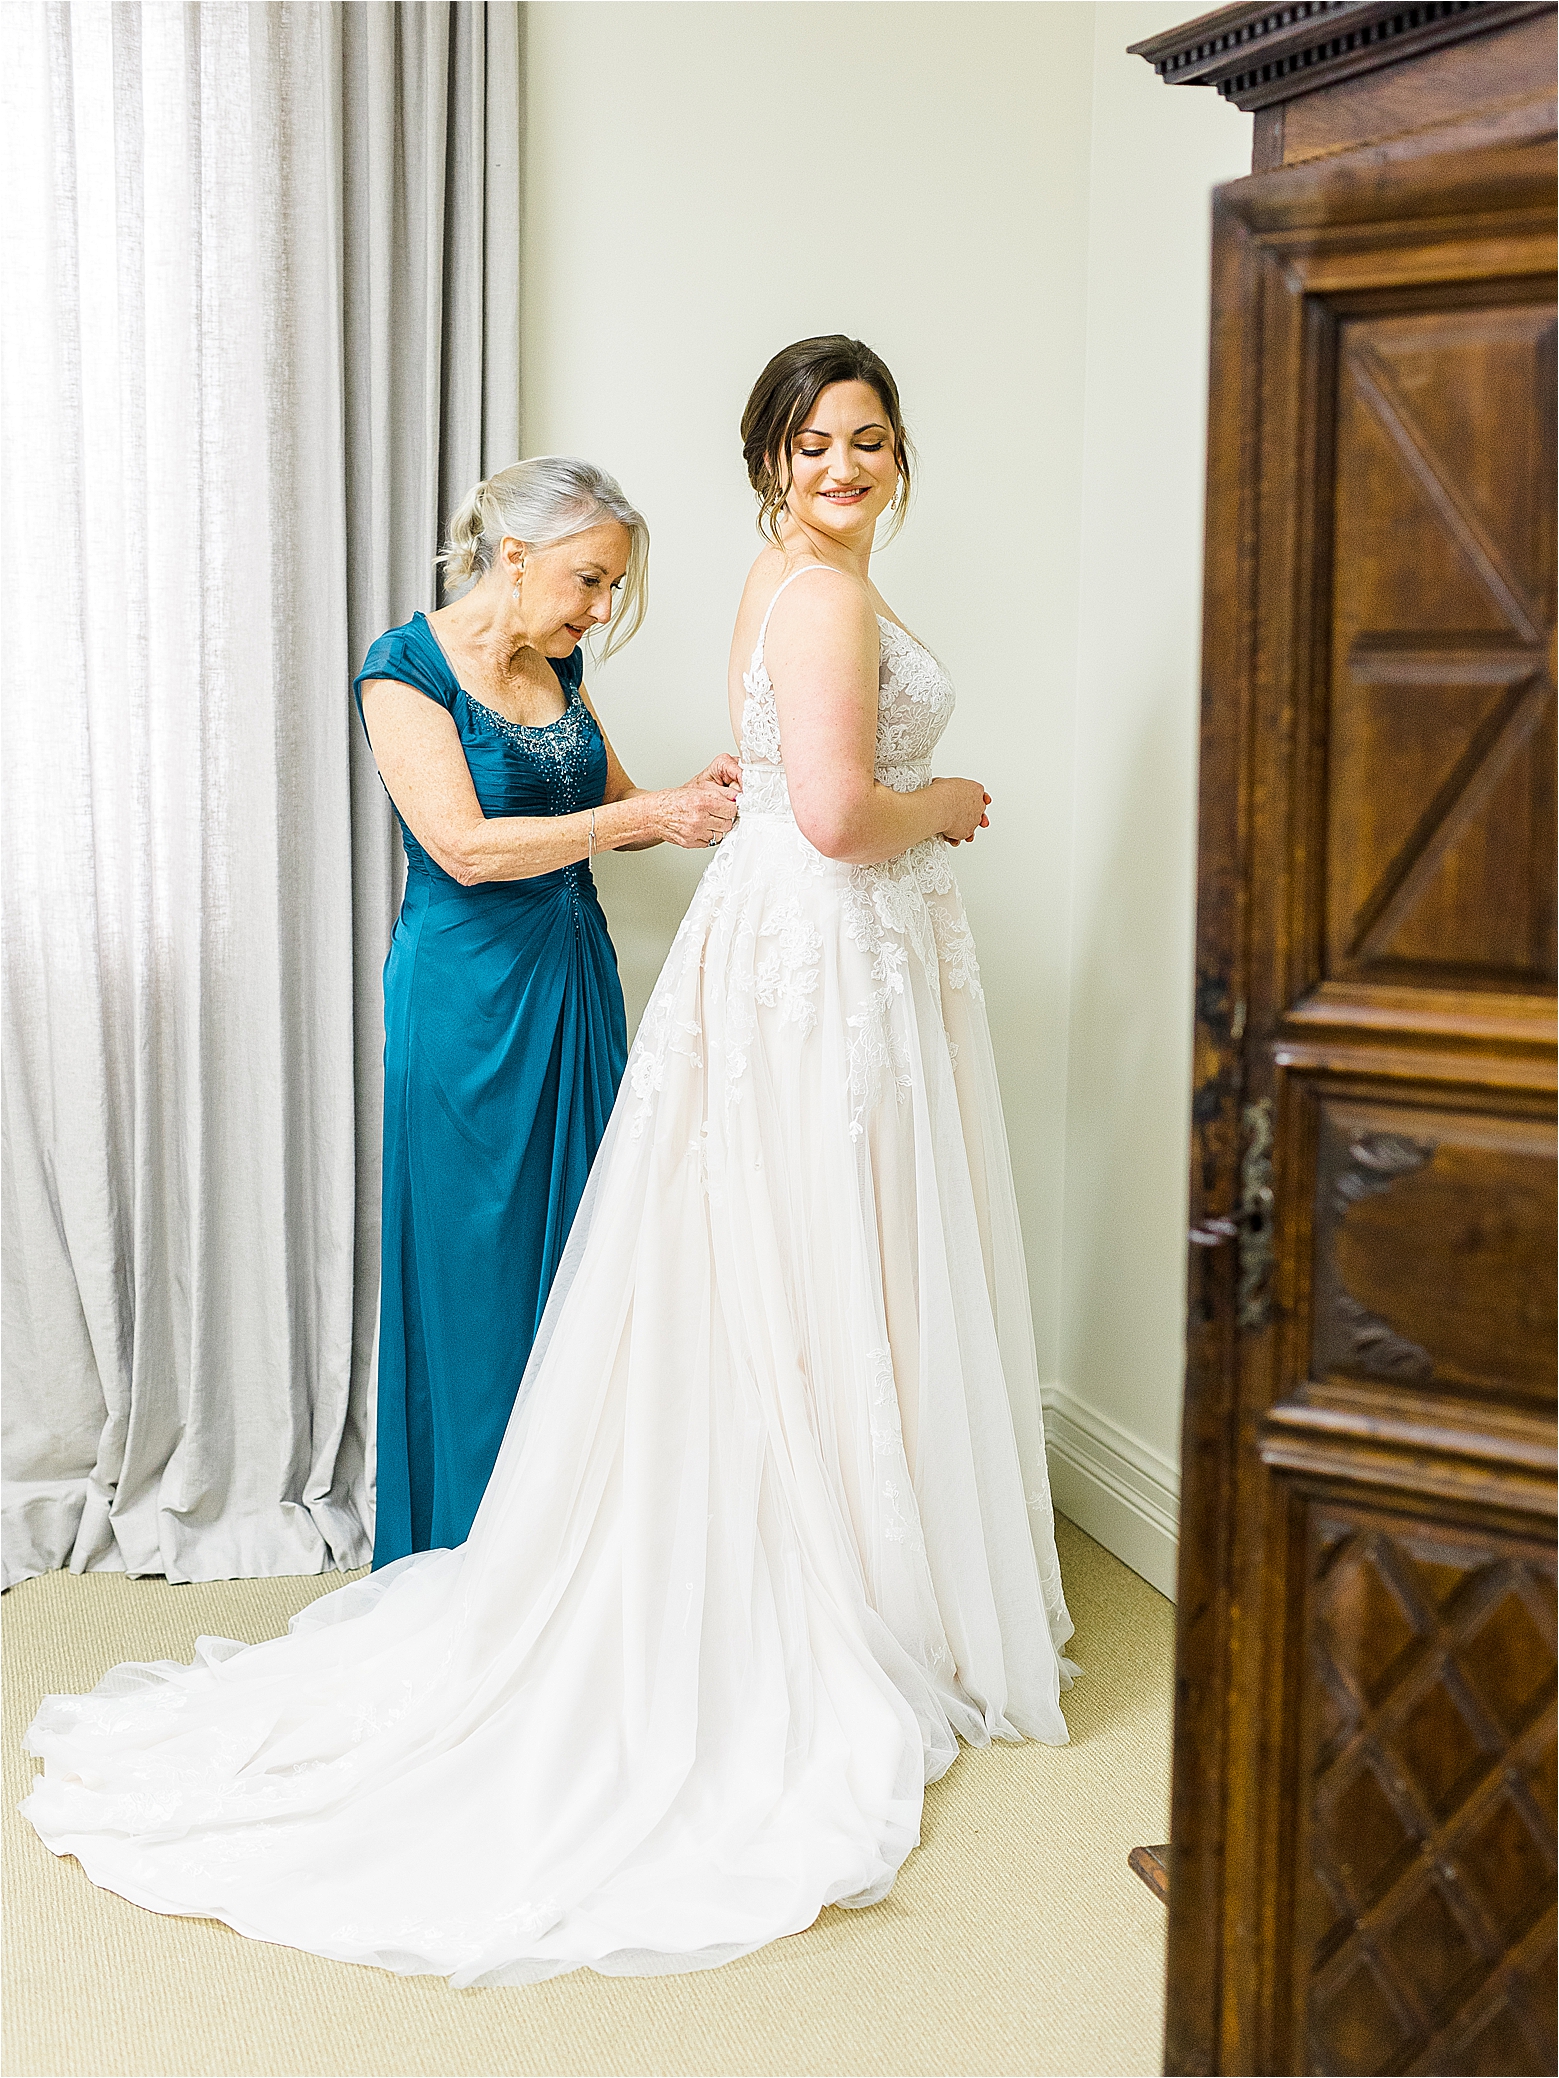 A mother of the bride in a blue dress zips up her daughter as she glances over her shoulder in the bridal suite at Alamo Heights United Methodist Church in San Antonio, Texas 